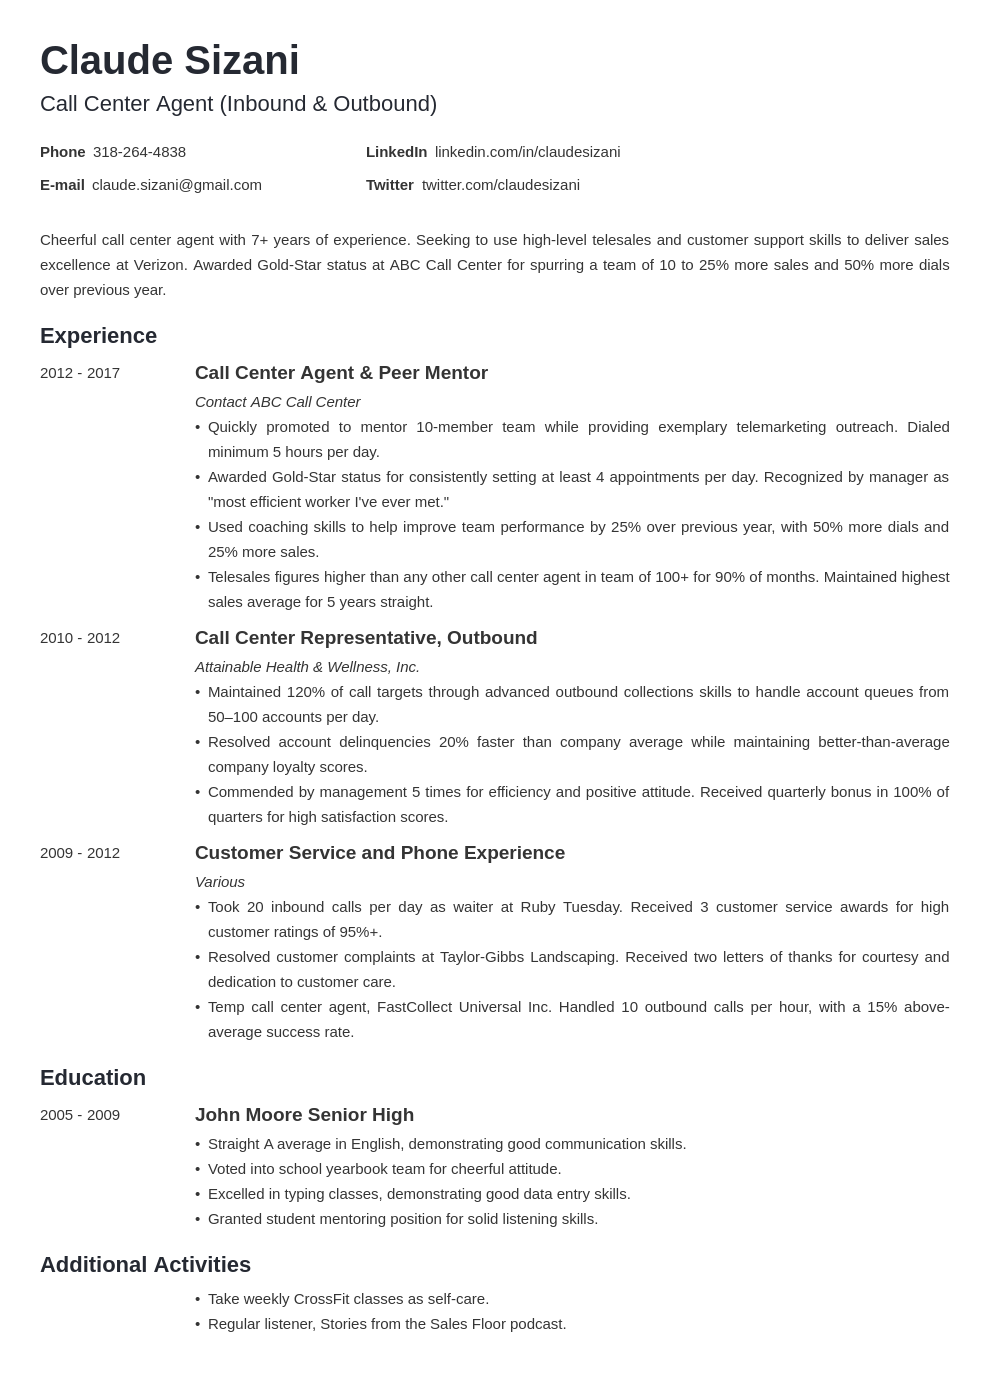 skills in resume for call center agent without experience